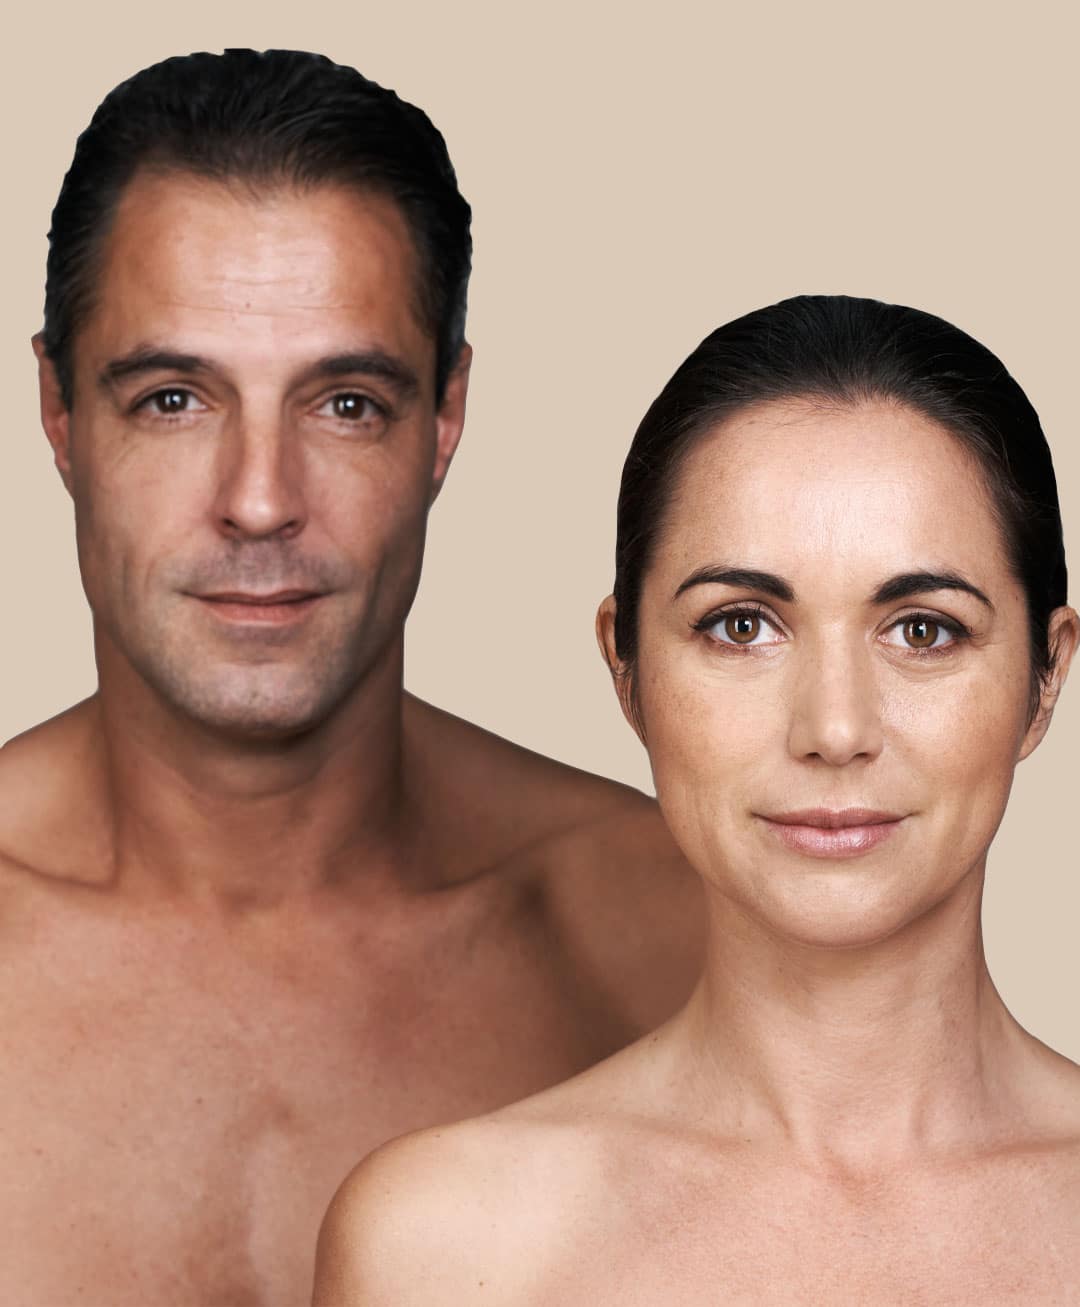 A middle-aged man and woman with firm and smooth skin complexion pose together.